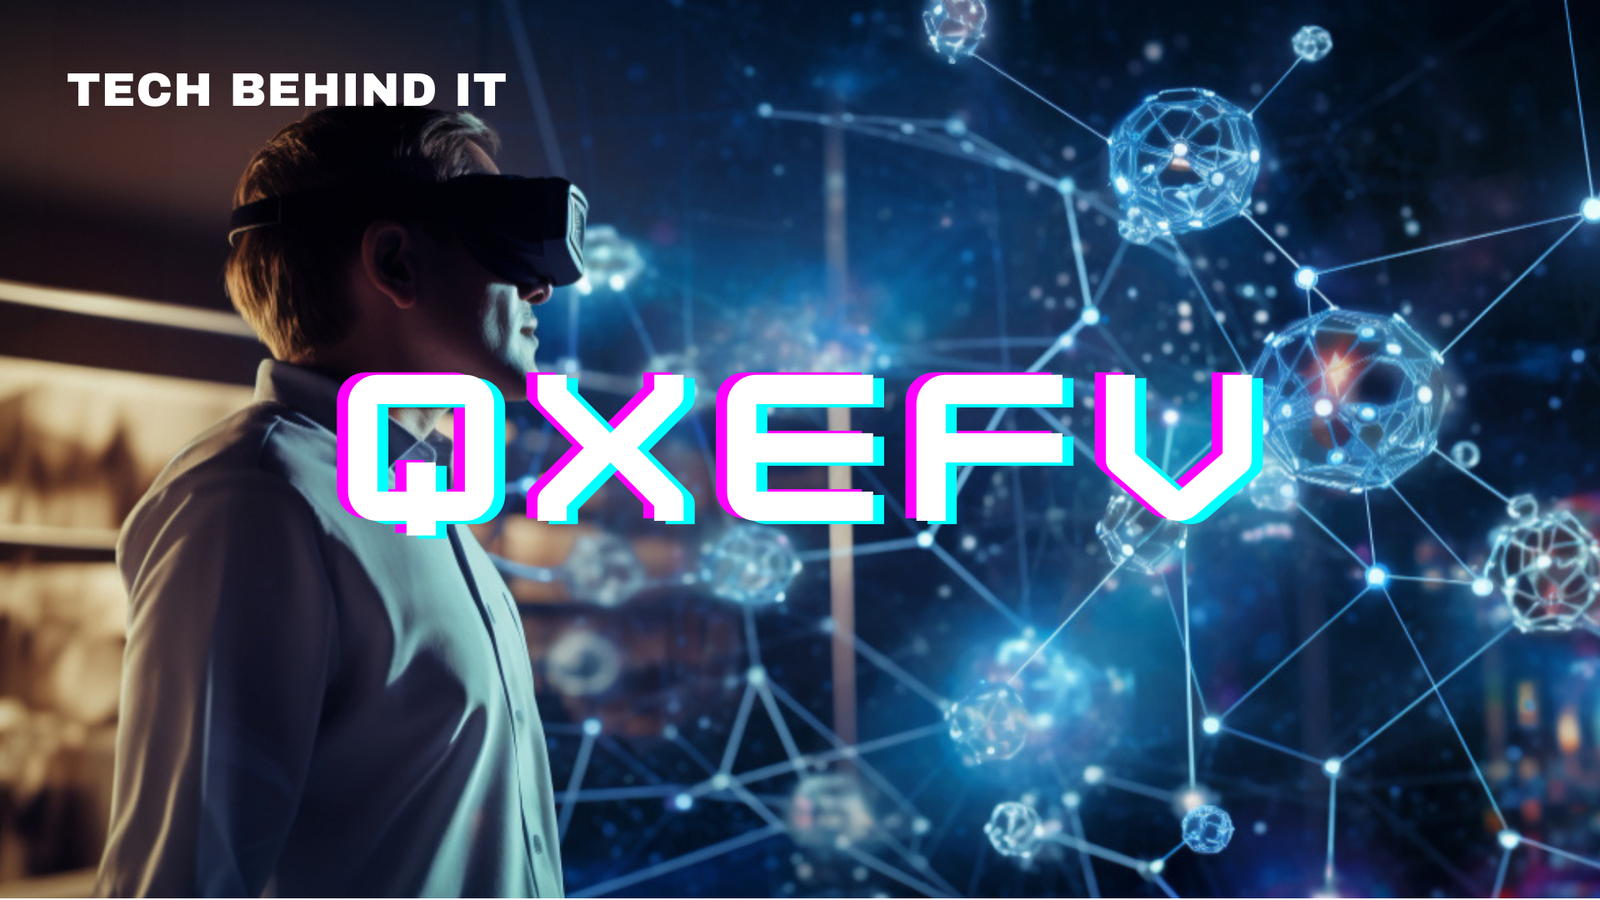 Qxefv- A Boon In The World Of Technology